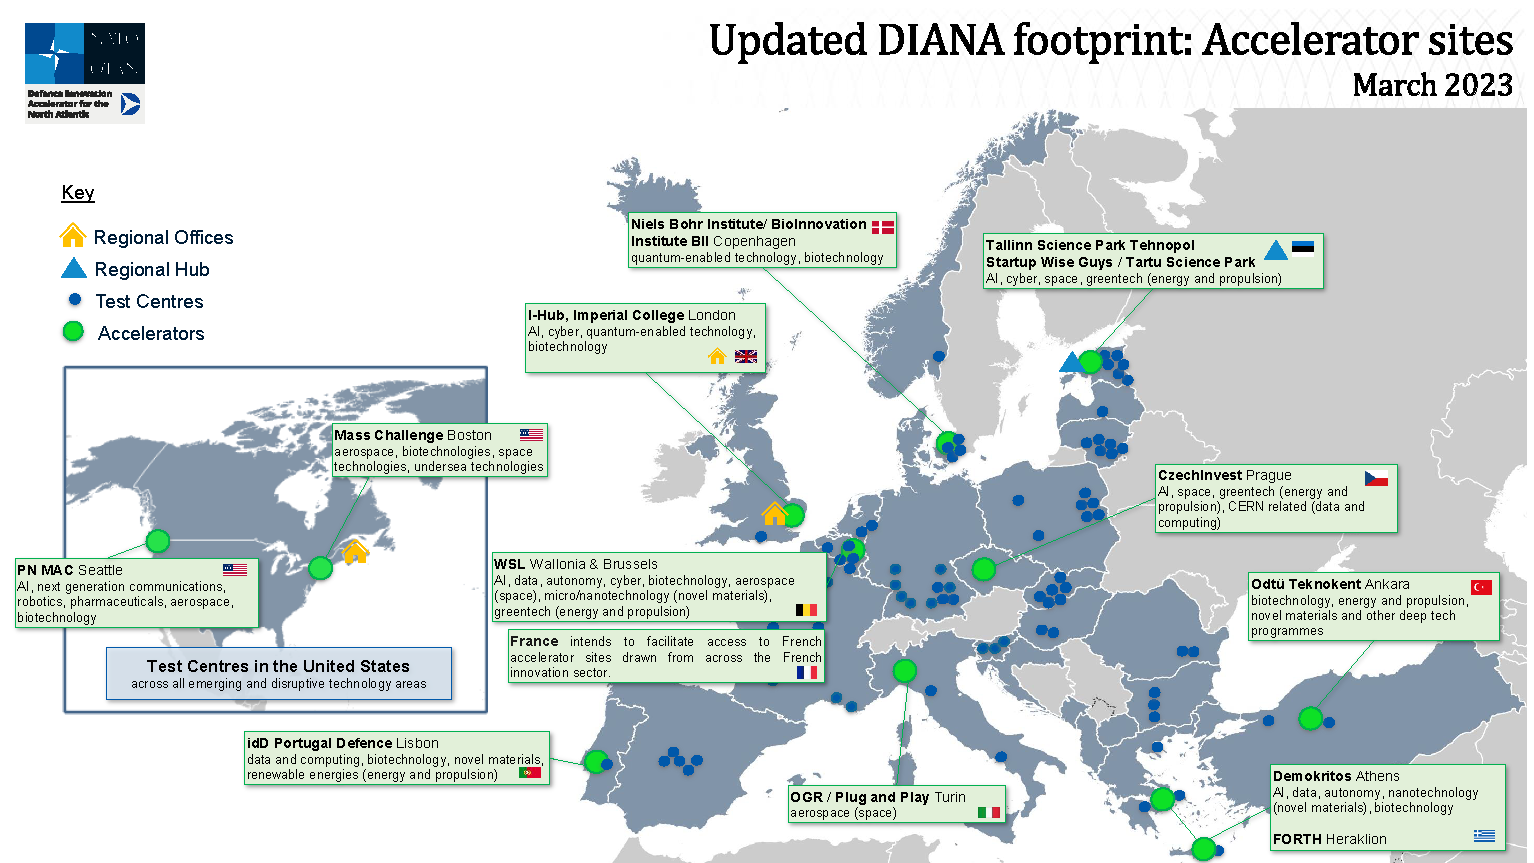 NATO DIANA Accelerator Sites as of March 2023